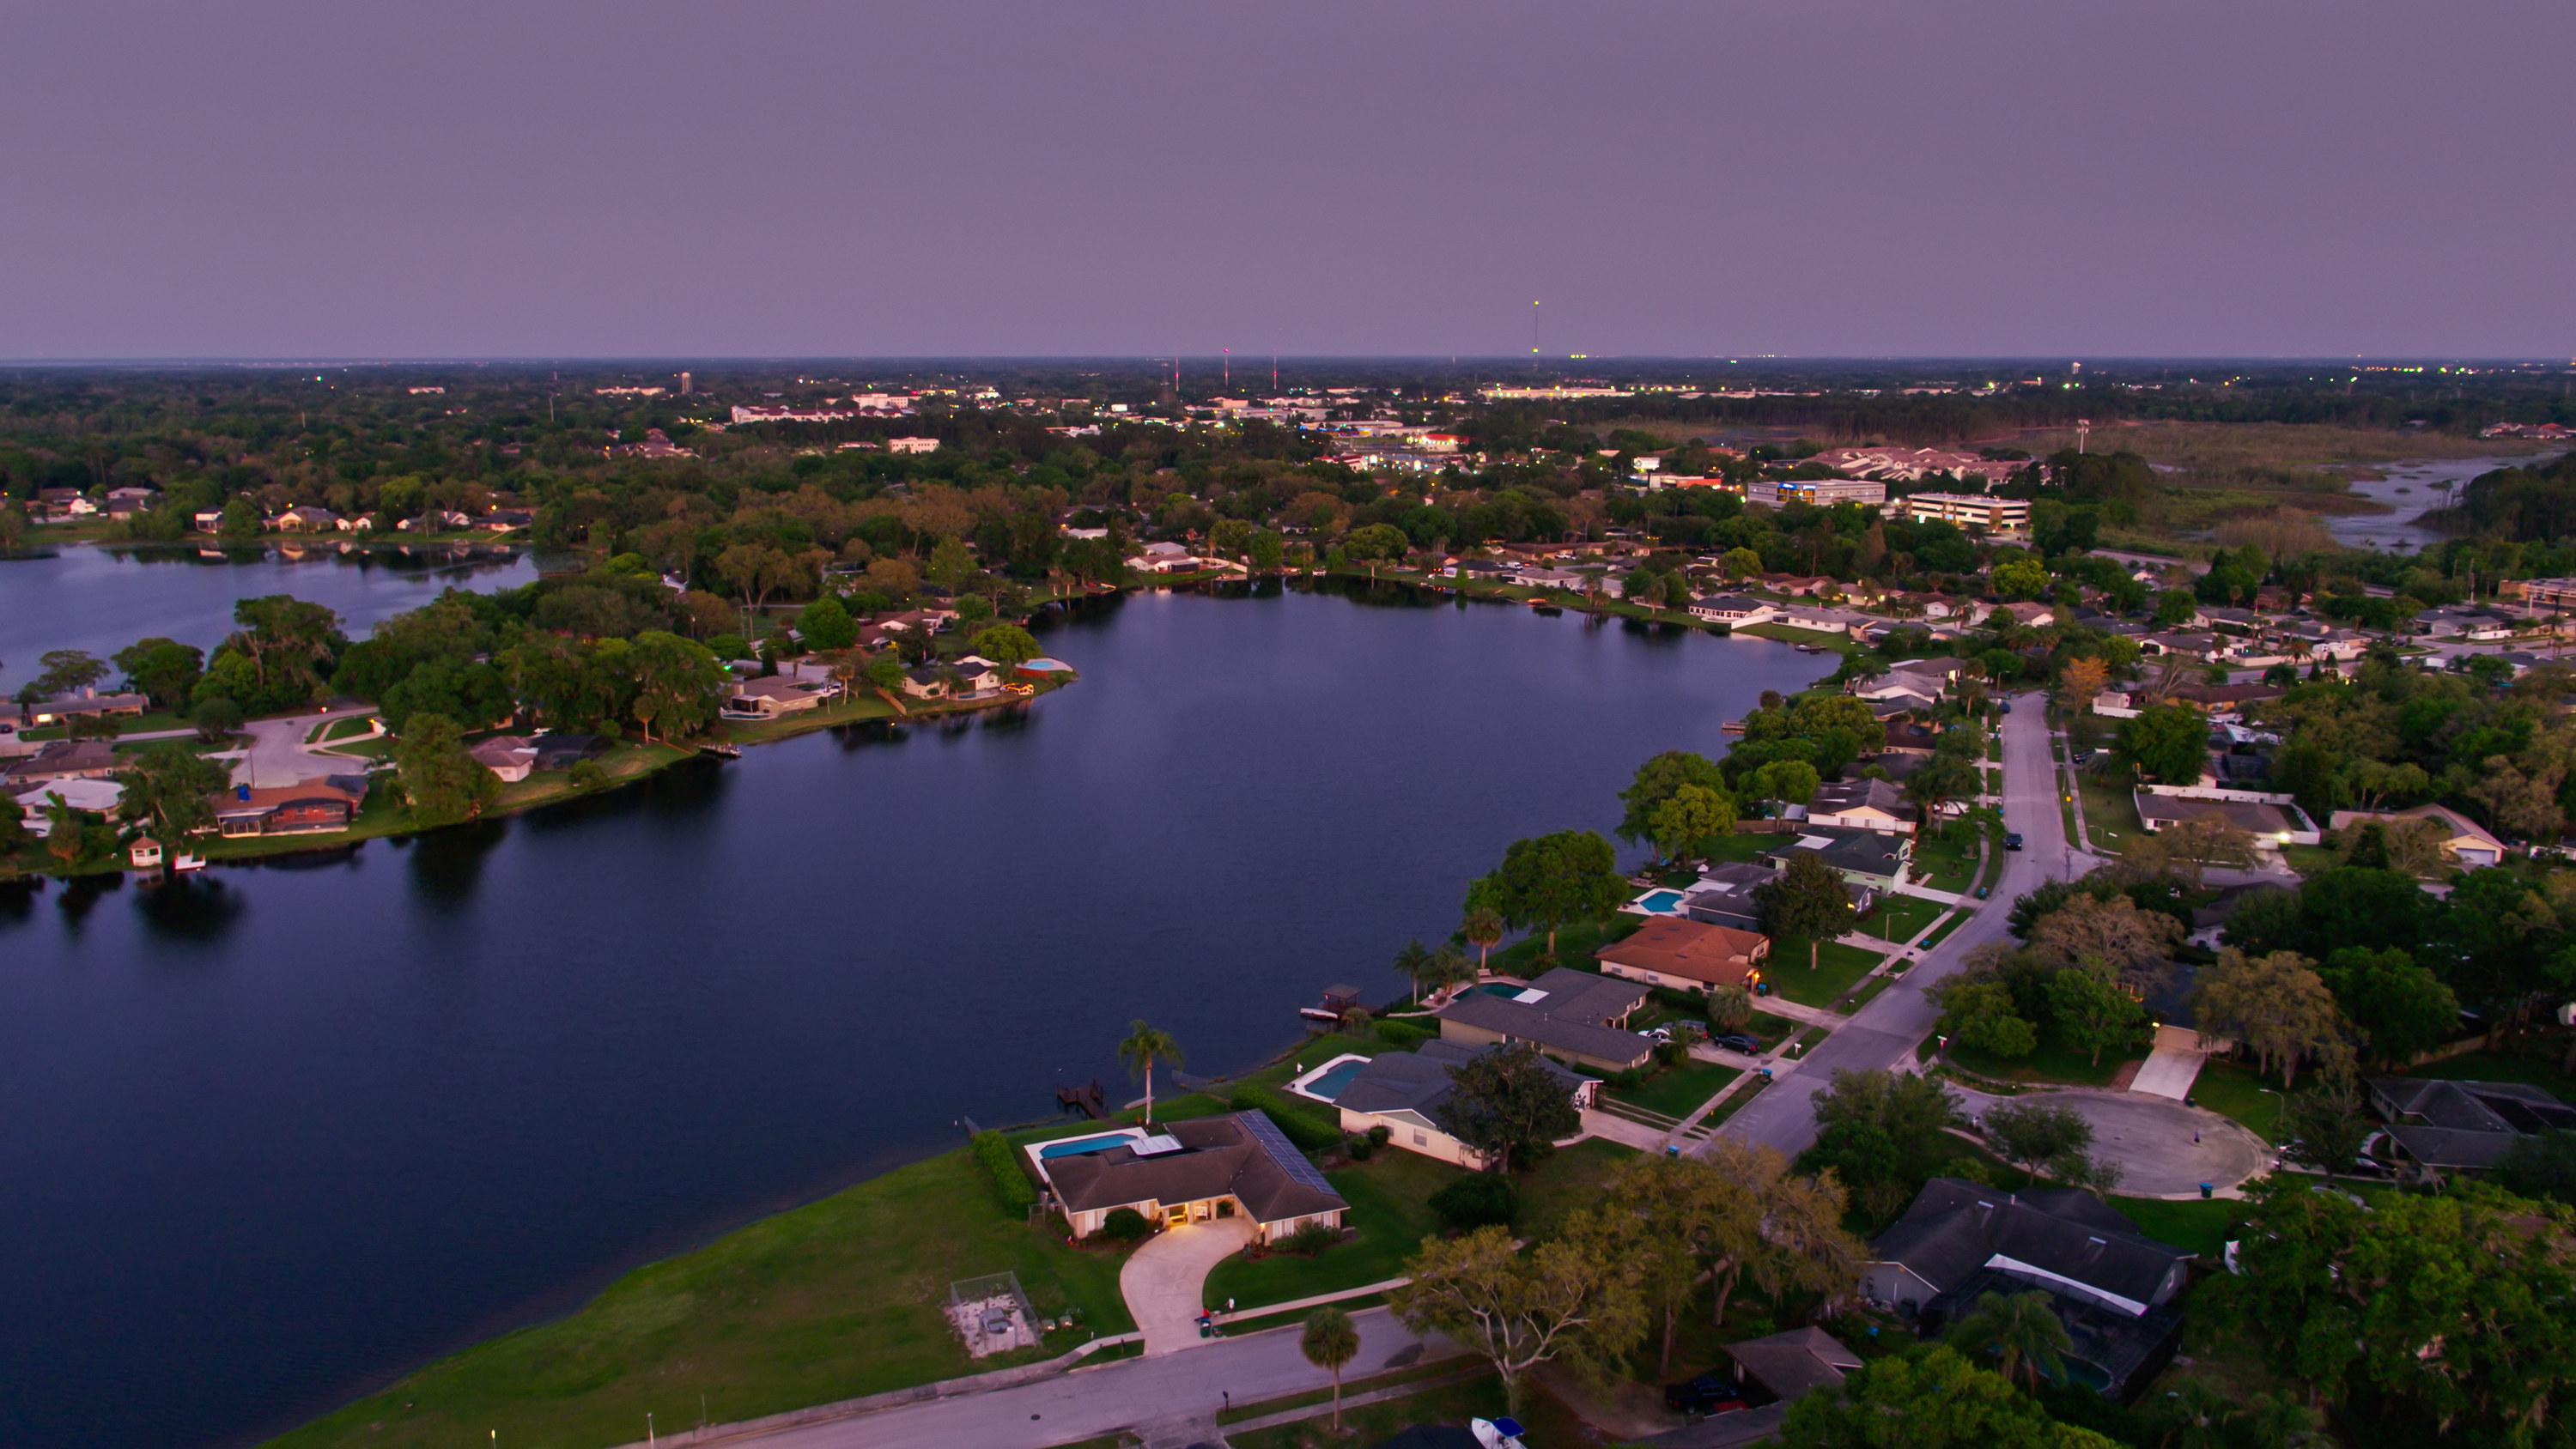 Aerial shot of the Orlando suburb of Longwood, Florida on a spring evening at twilight